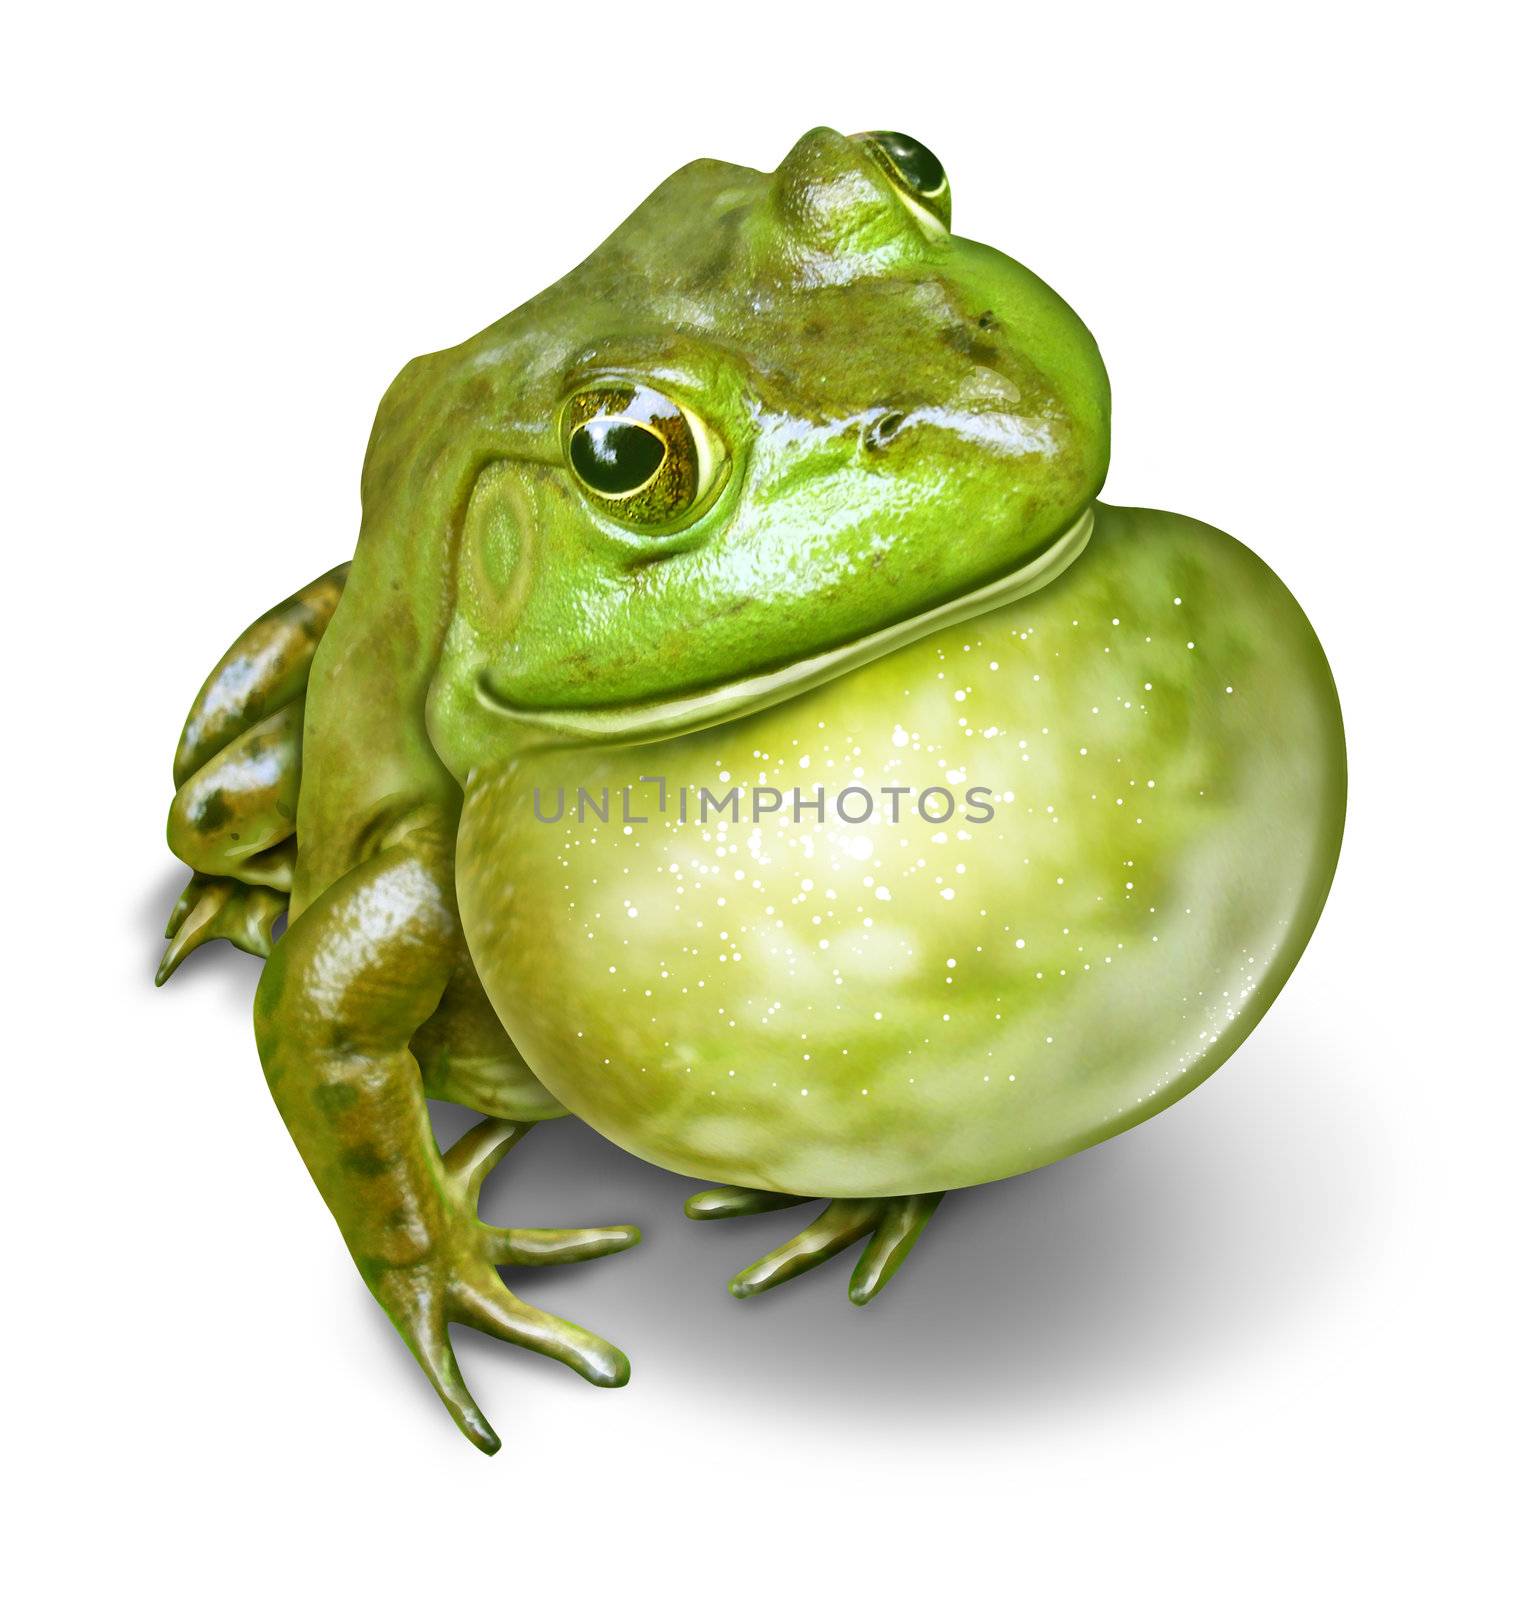 Frog Inflated Throat by brightsource